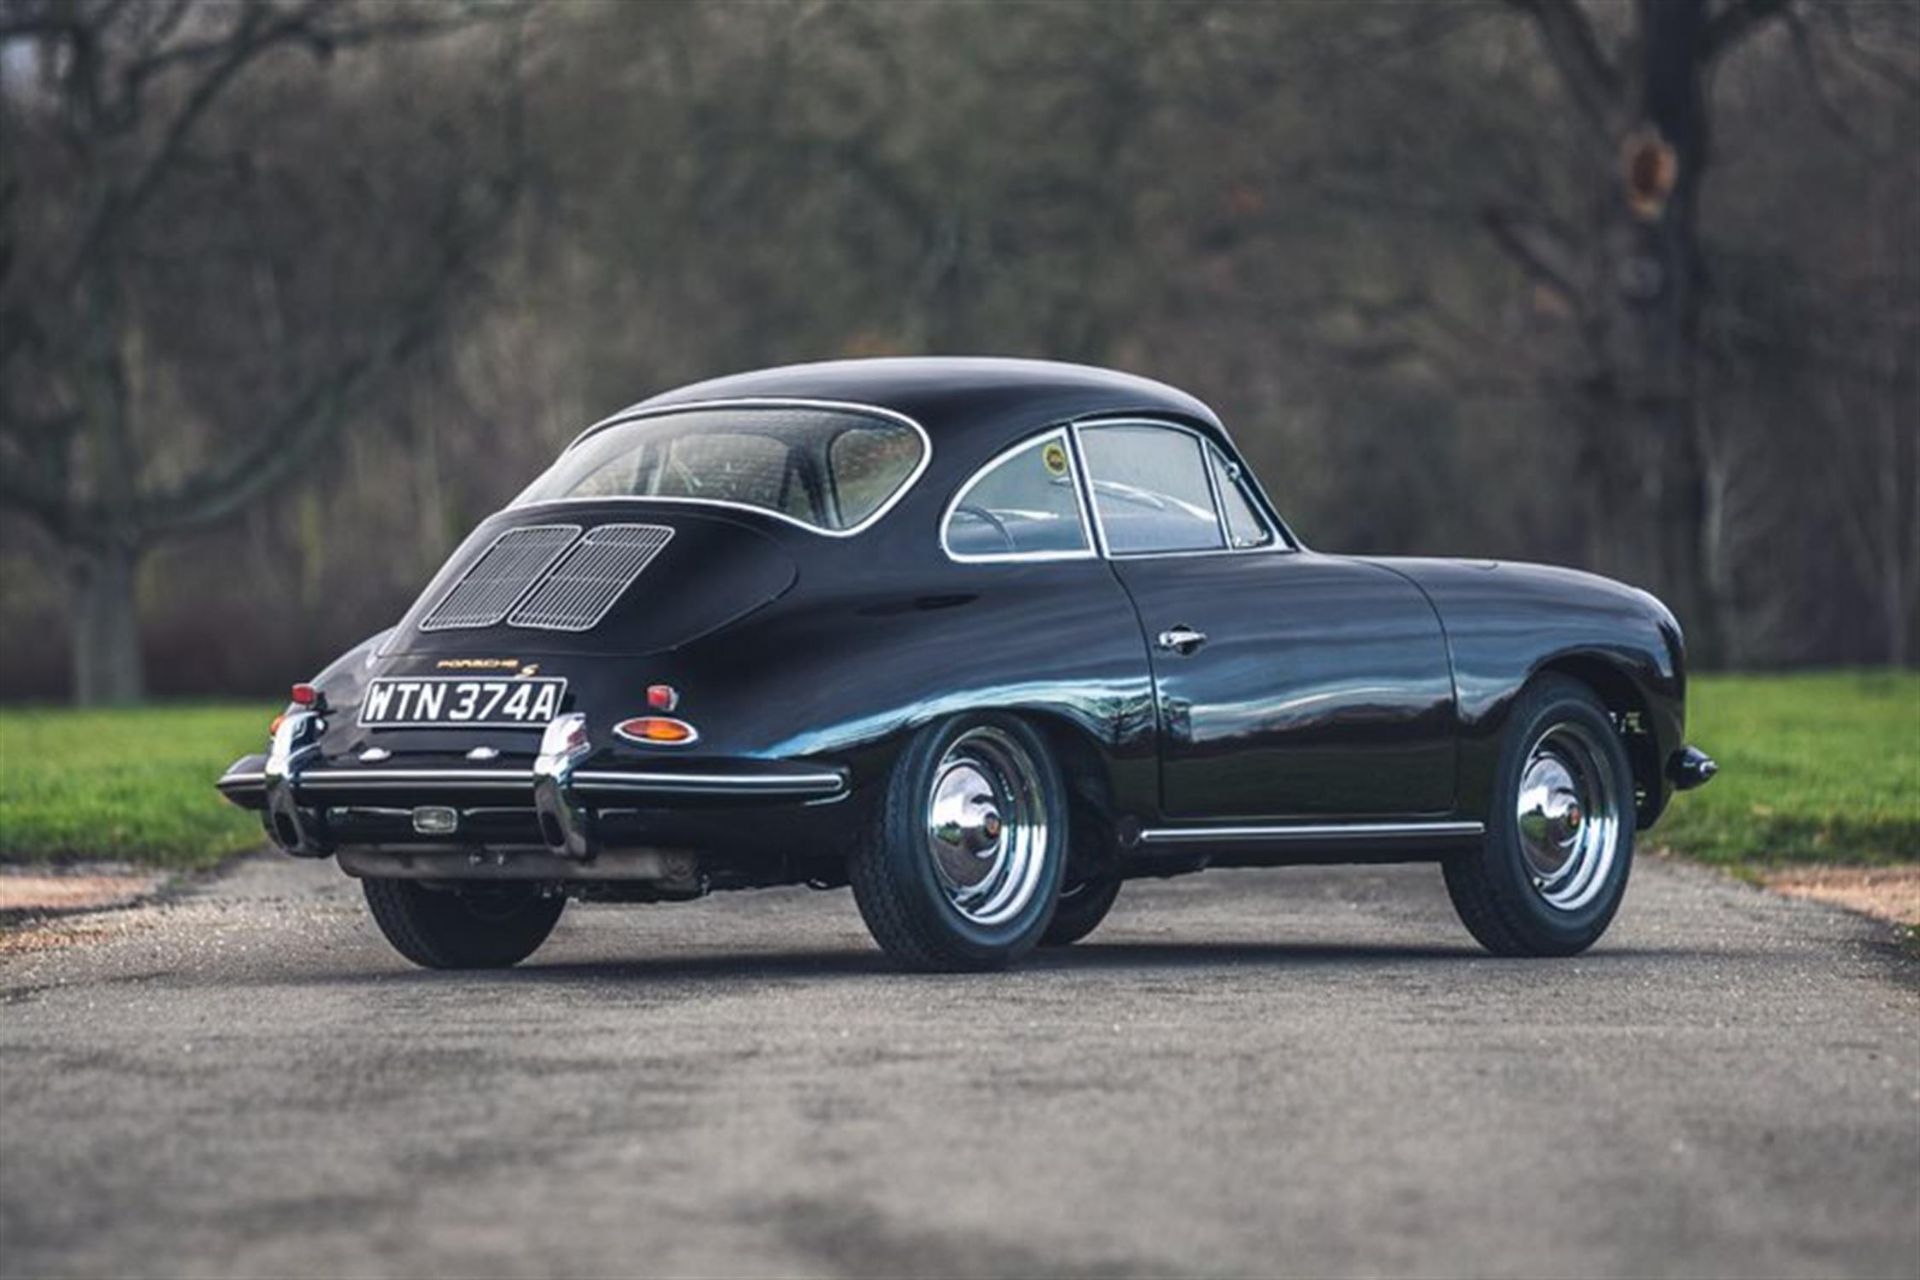 1963 Porsche 356 B T6 Coupe to ‘S’ Specification - Image 5 of 10